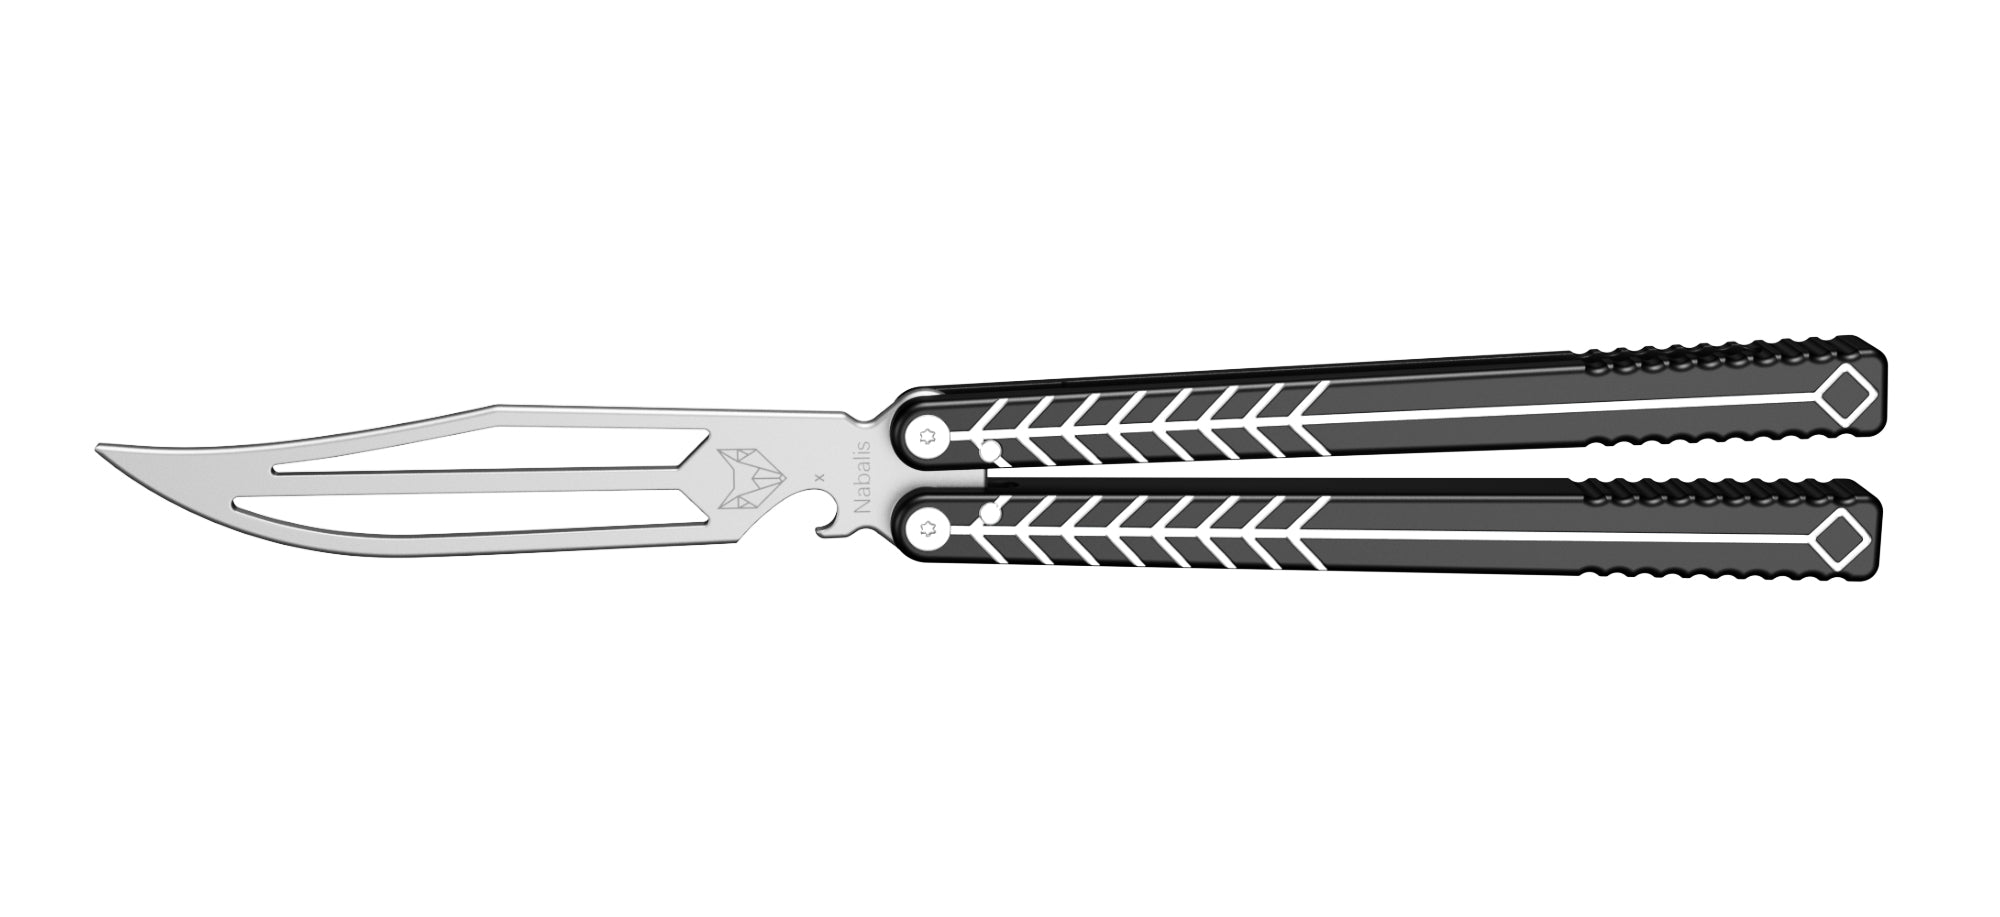 The Coolest Balisong Knife on a Budget: Nabalis Vulp V2 balisong trainer.